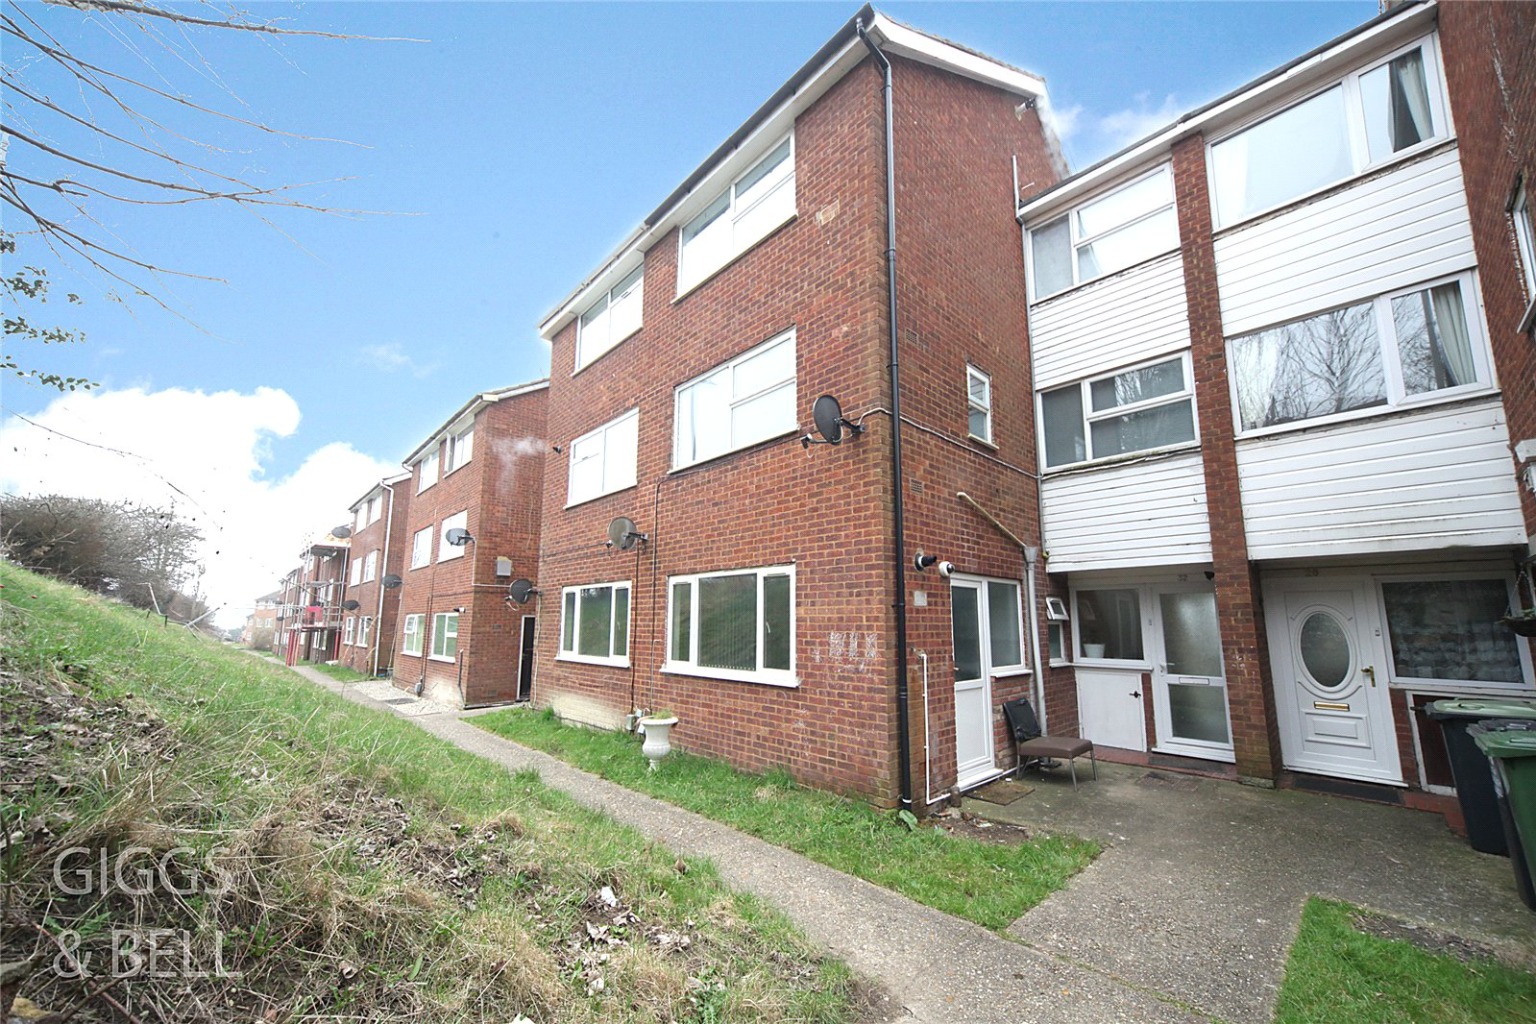 2 bed flat for sale in Brendon Avenue, Bedfordshire, LU2 